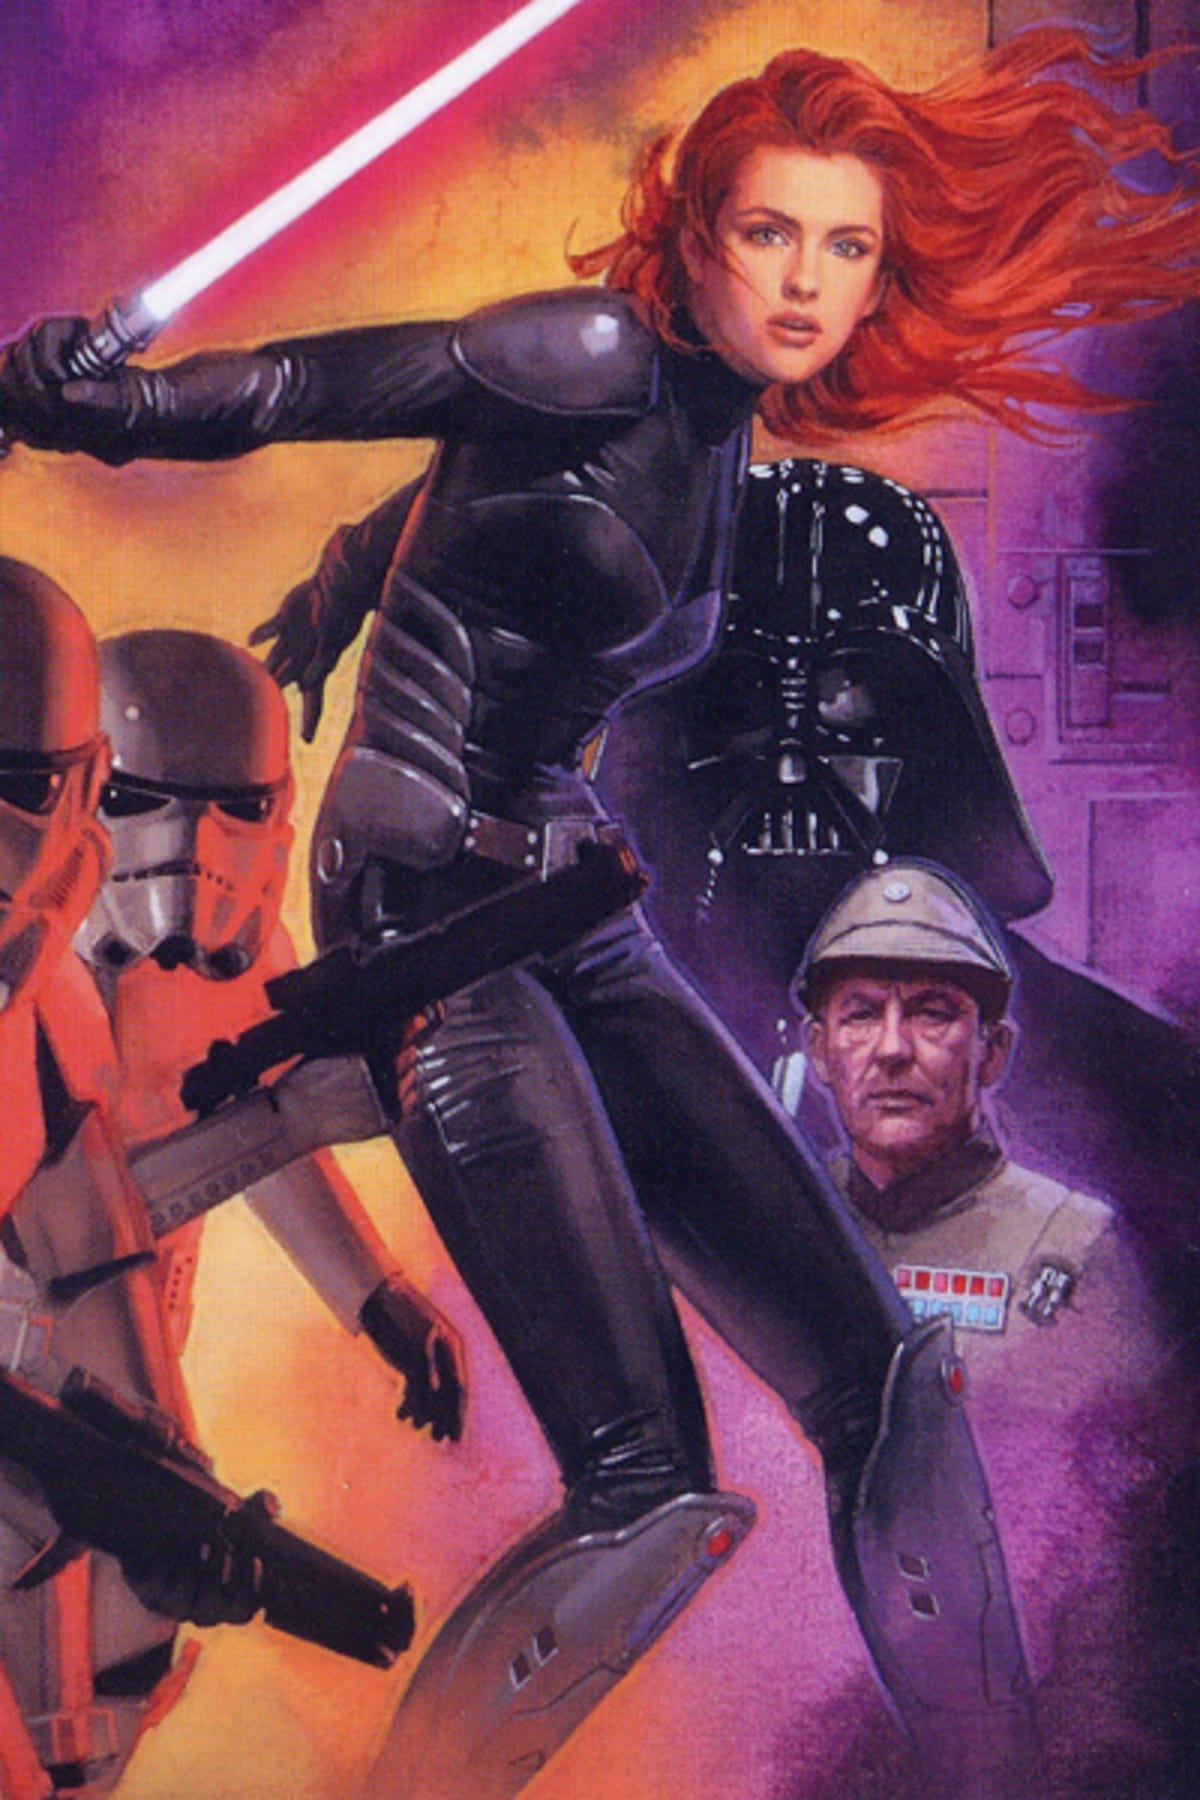 Red-headed fan-favorite Mara Jade was once an assassin of the Empire's dark overlord comics and books. But what would she be in a 